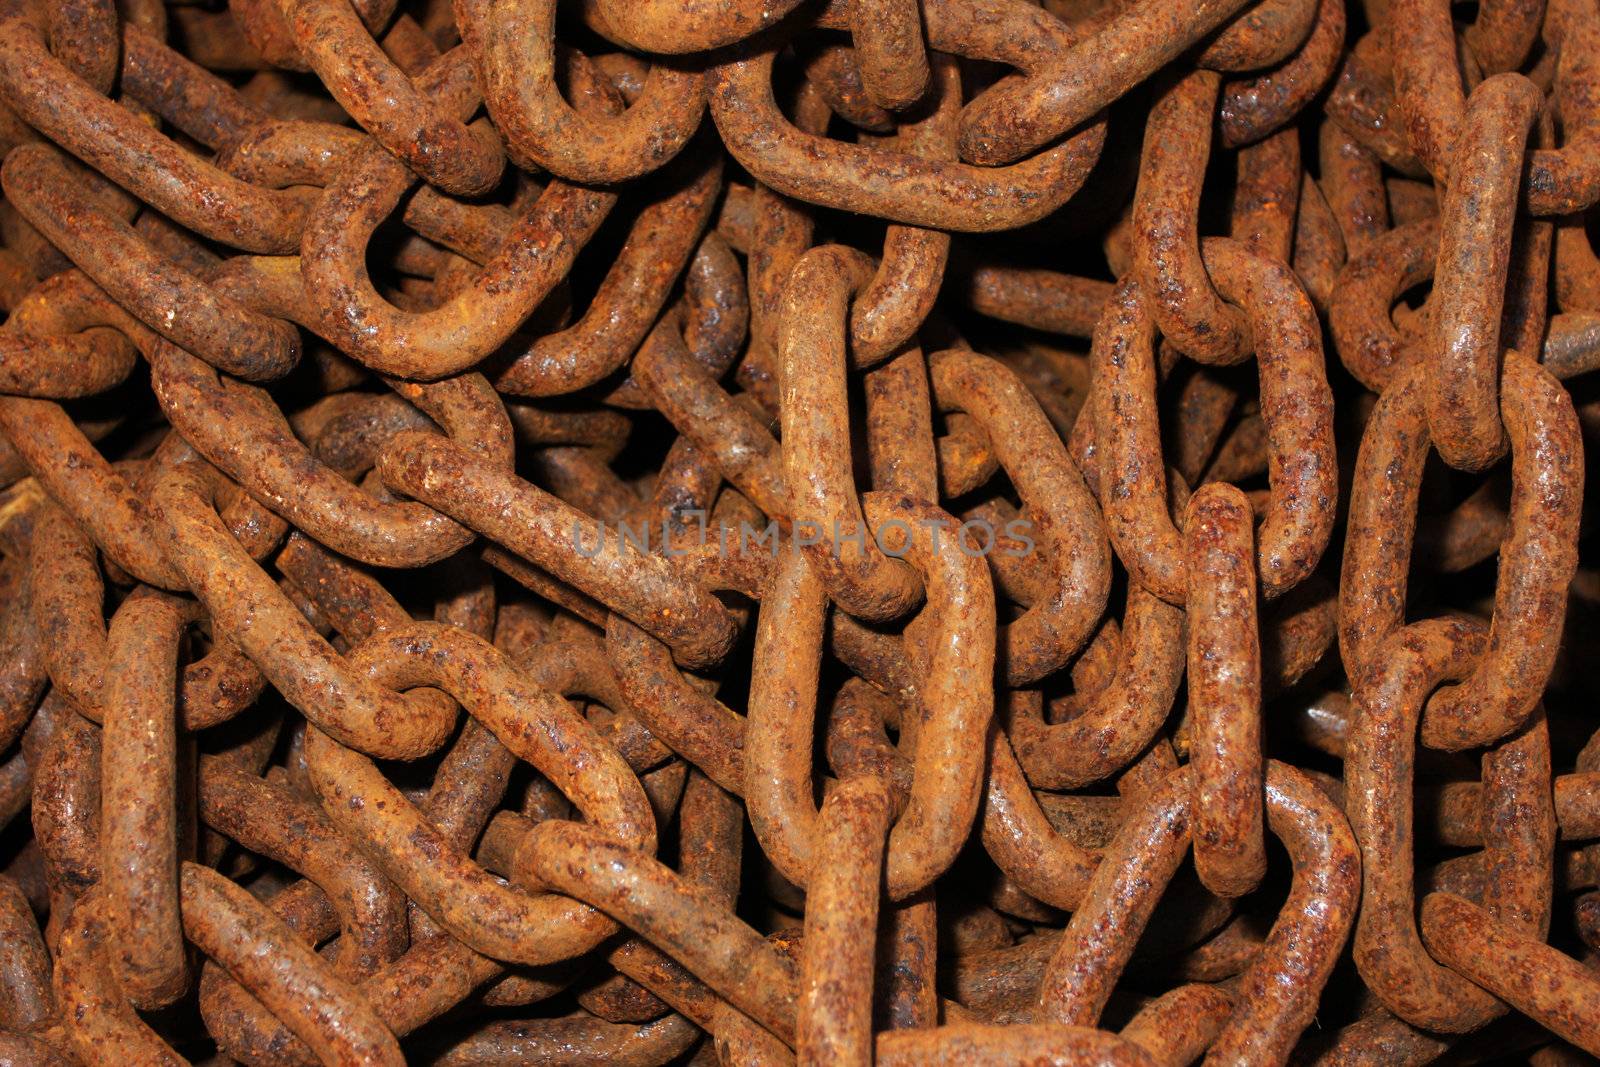 Rusty chain pile great texture and character, perfect for designs or backgrounds